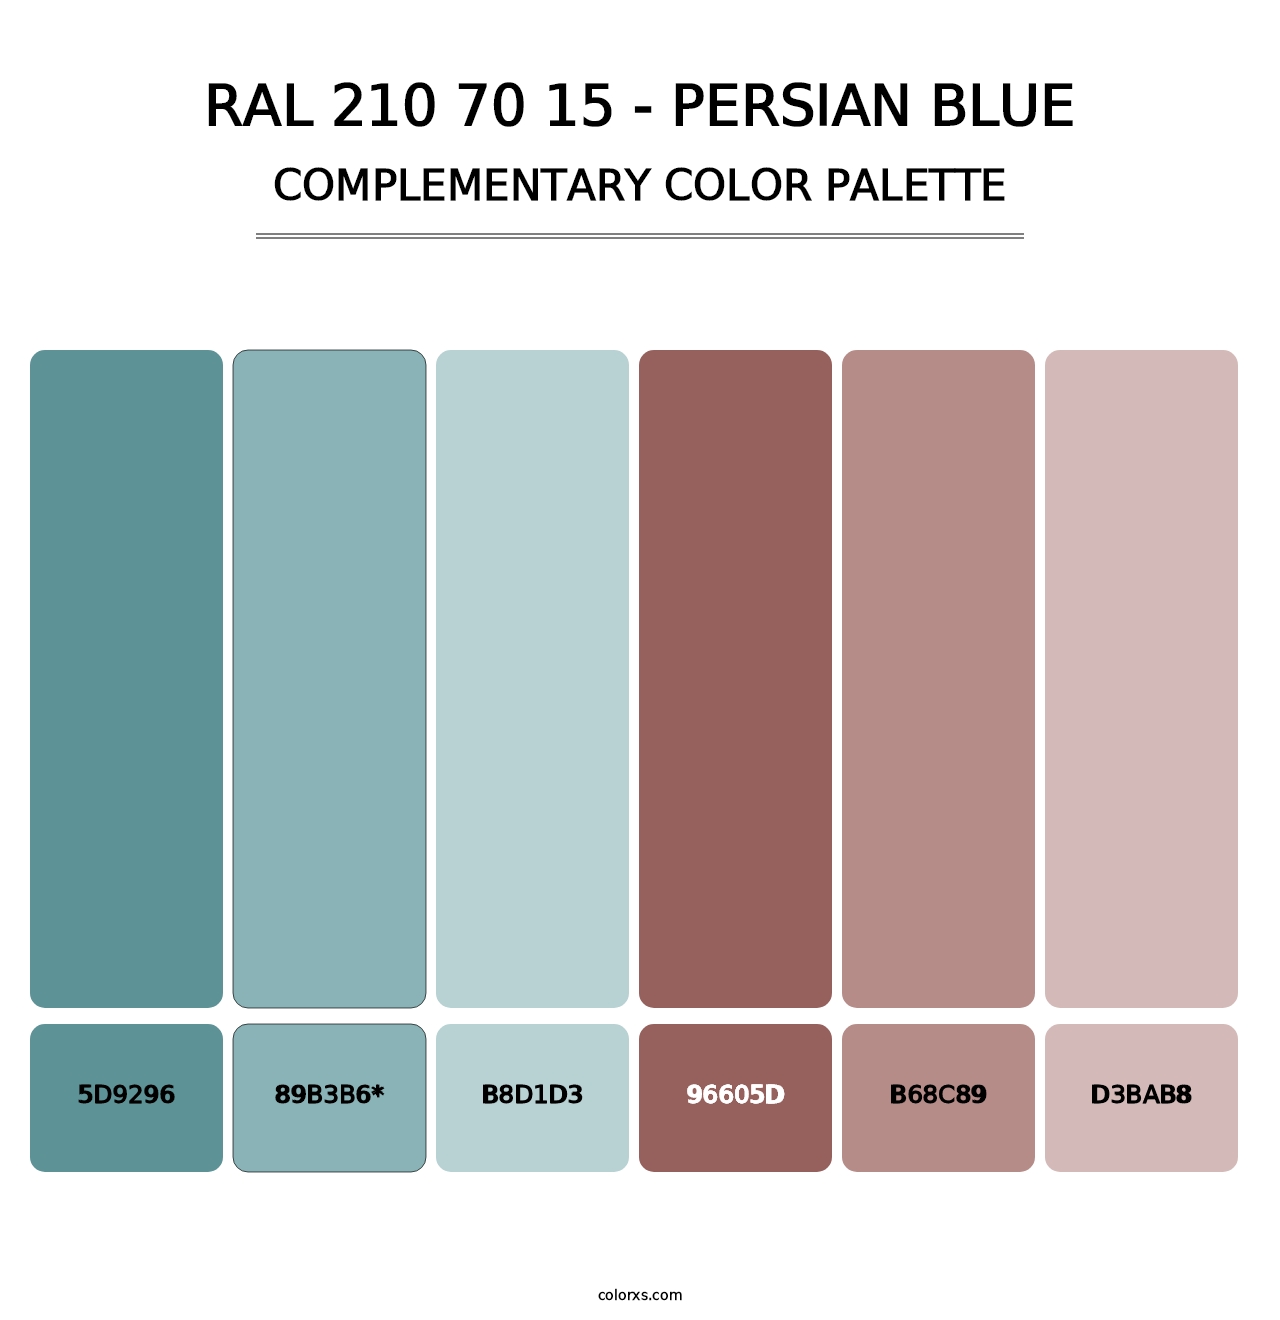 RAL 210 70 15 - Persian Blue - Complementary Color Palette